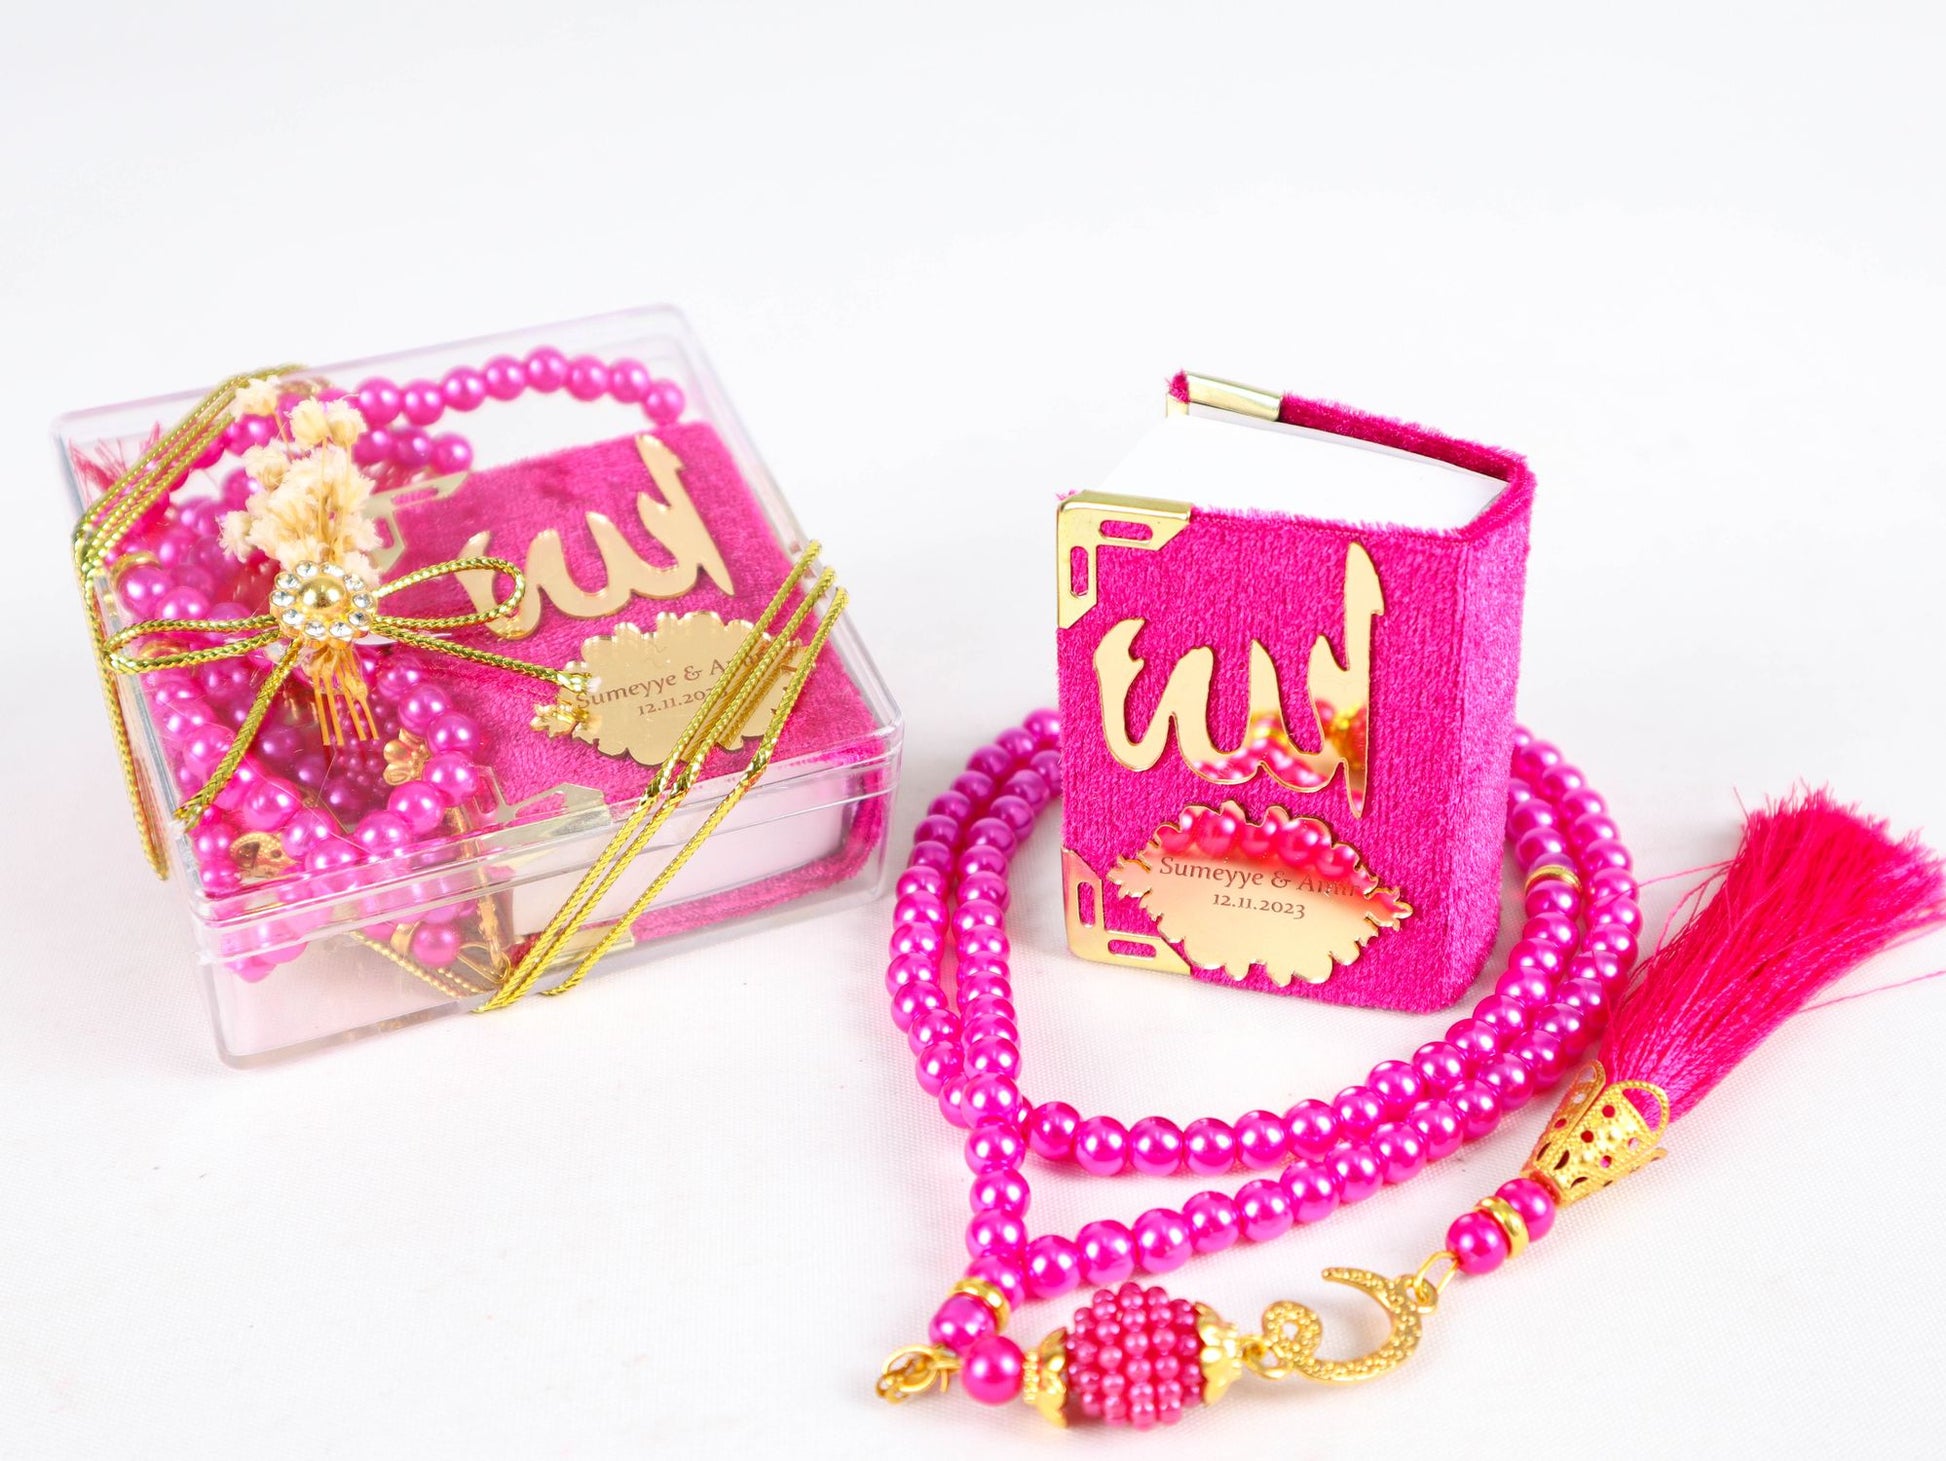 Personalized Mini Quran Prayer Beads Flowers with Pearl Wedding Favor - Islamic Elite Favors is a handmade gift shop offering a wide variety of unique and personalized gifts for all occasions. Whether you're looking for the perfect Ramadan, Eid, Hajj, wedding gift or something special for a birthday, baby shower or anniversary, we have something for everyone. High quality, made with love.